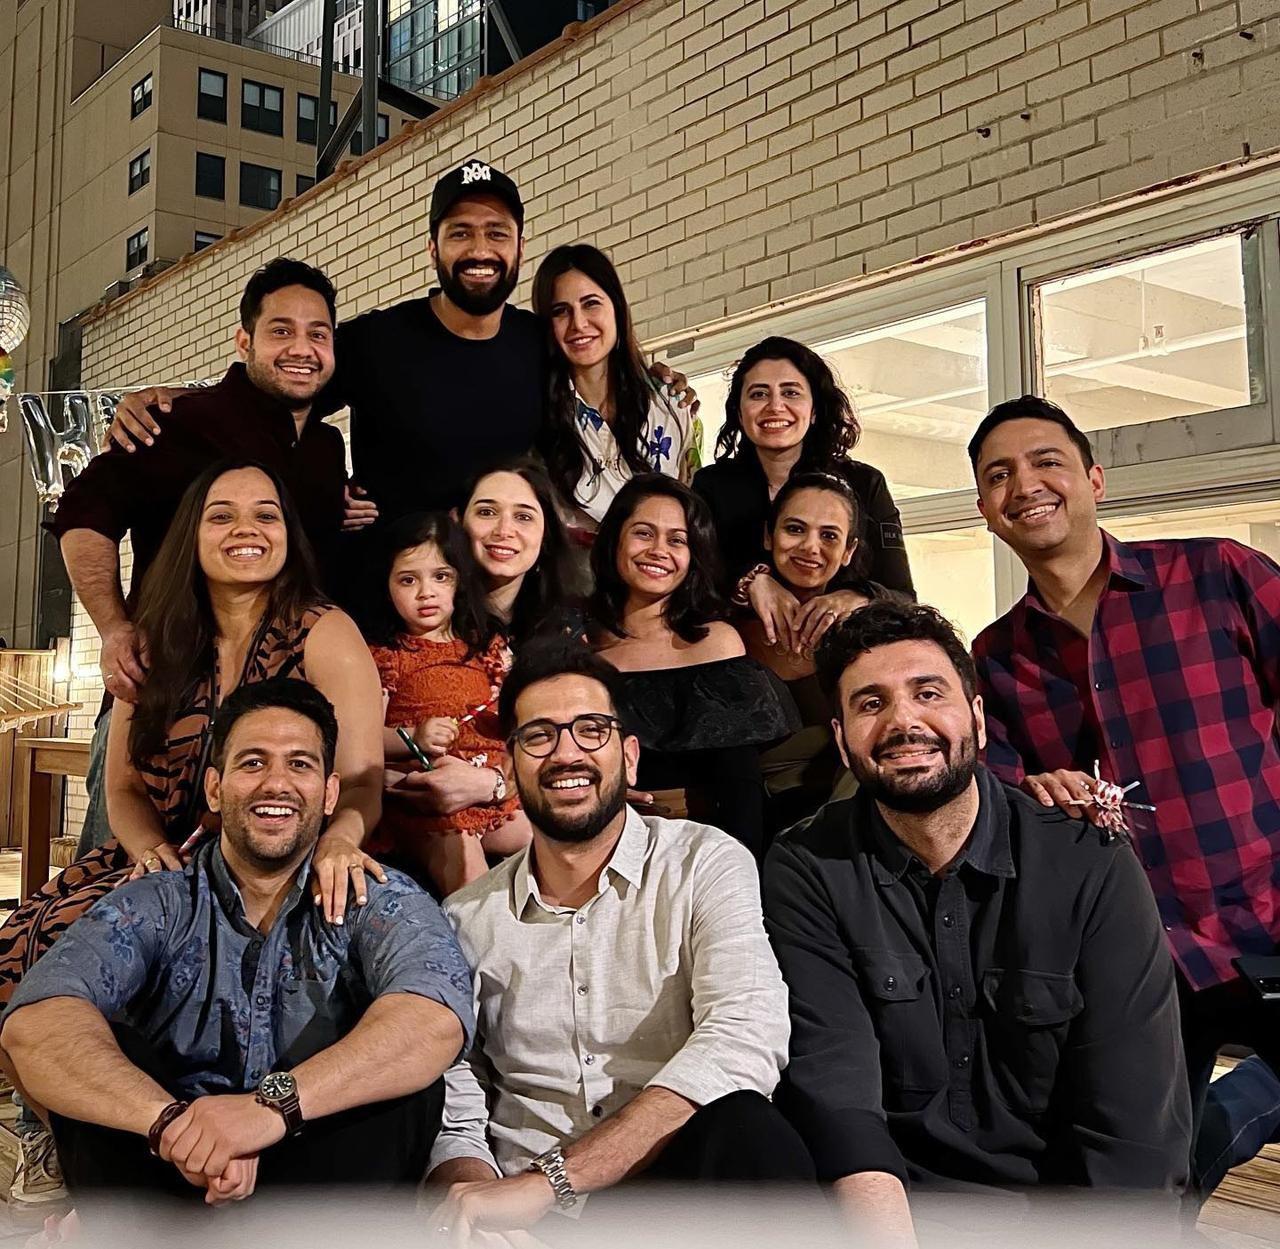 It was then time for a group picture for Katrina Kaif, Vicky Kaushal as they partied hard in New York with friends. He also shared a video where he was all smiles cutting his birthday cake while Katrina Kaif looked overjoyed. 